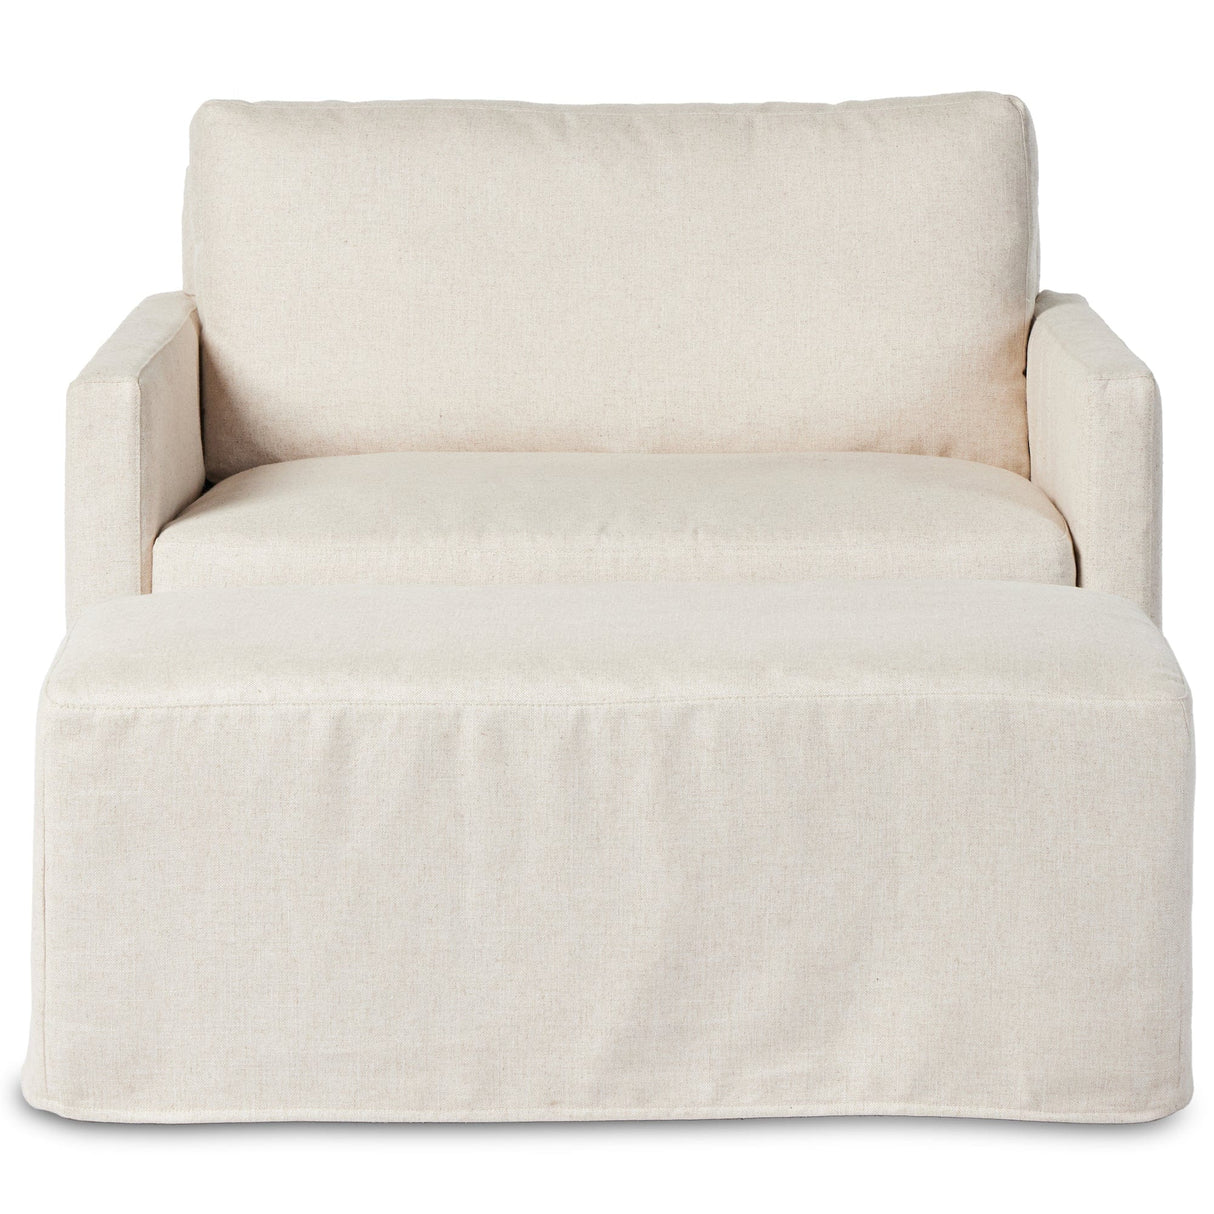 Four Hands Maddox Slipcover Chair with Ottoman Slipcover Chair with Ottoman four-hands-238944-001 801542182571